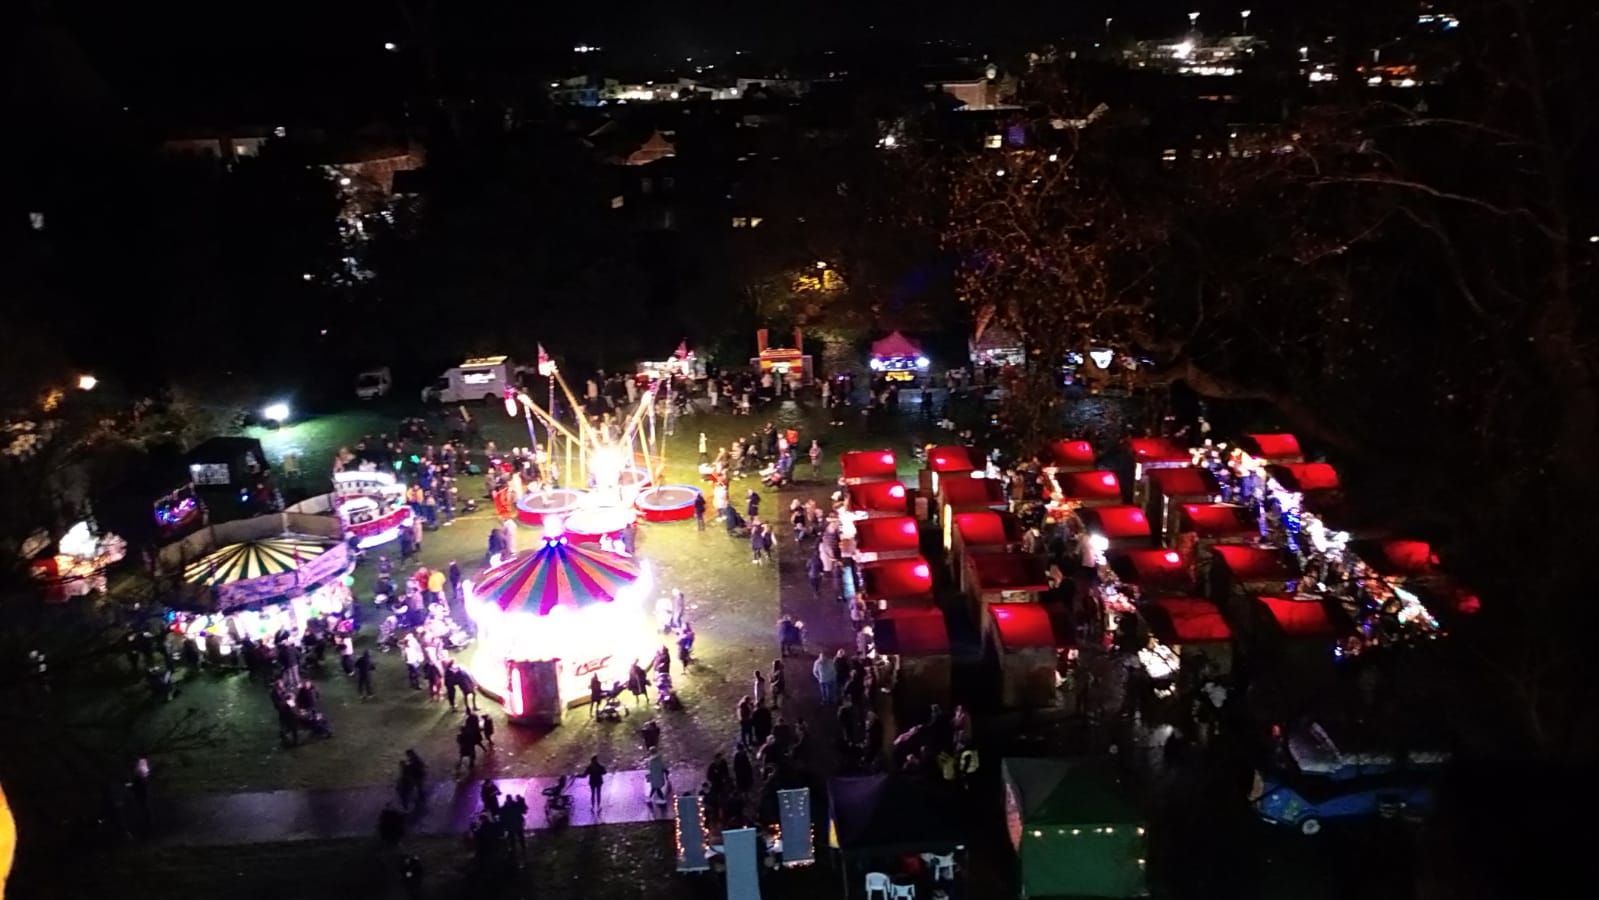 Arial shot of a christmas market at night with fair ground rides, christmas market chalets and lots of people